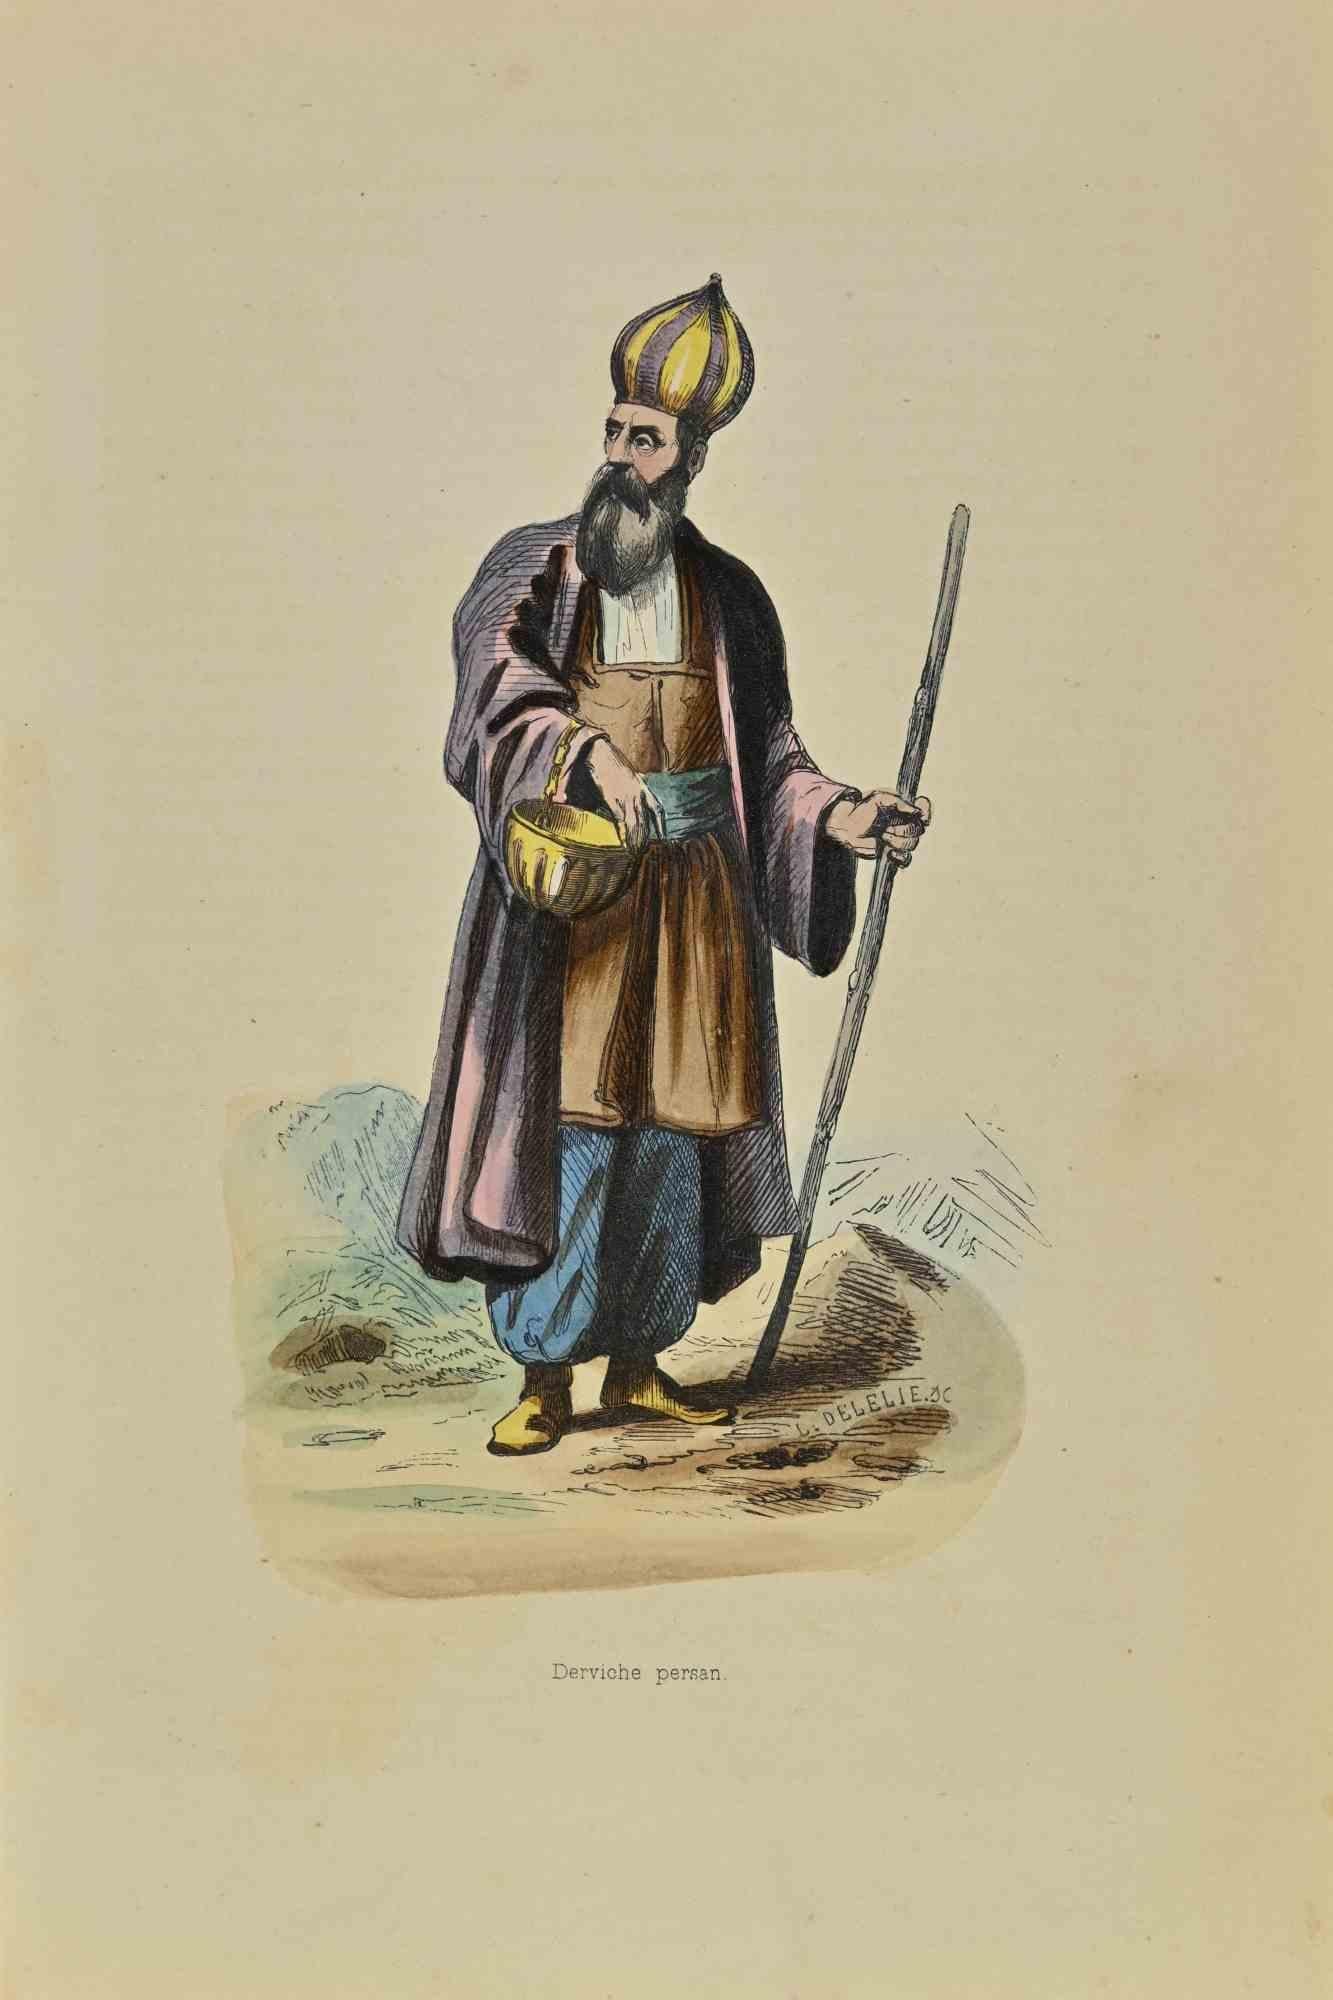 Persian Dervish is a lithograph made by Auguste Wahlen in 1844.

Hand colored.

Good condition.

At the center of the artwork is the original title "Derviche persan".

The work is part of Suite Moeurs, usages et costumes de tous les peuples du